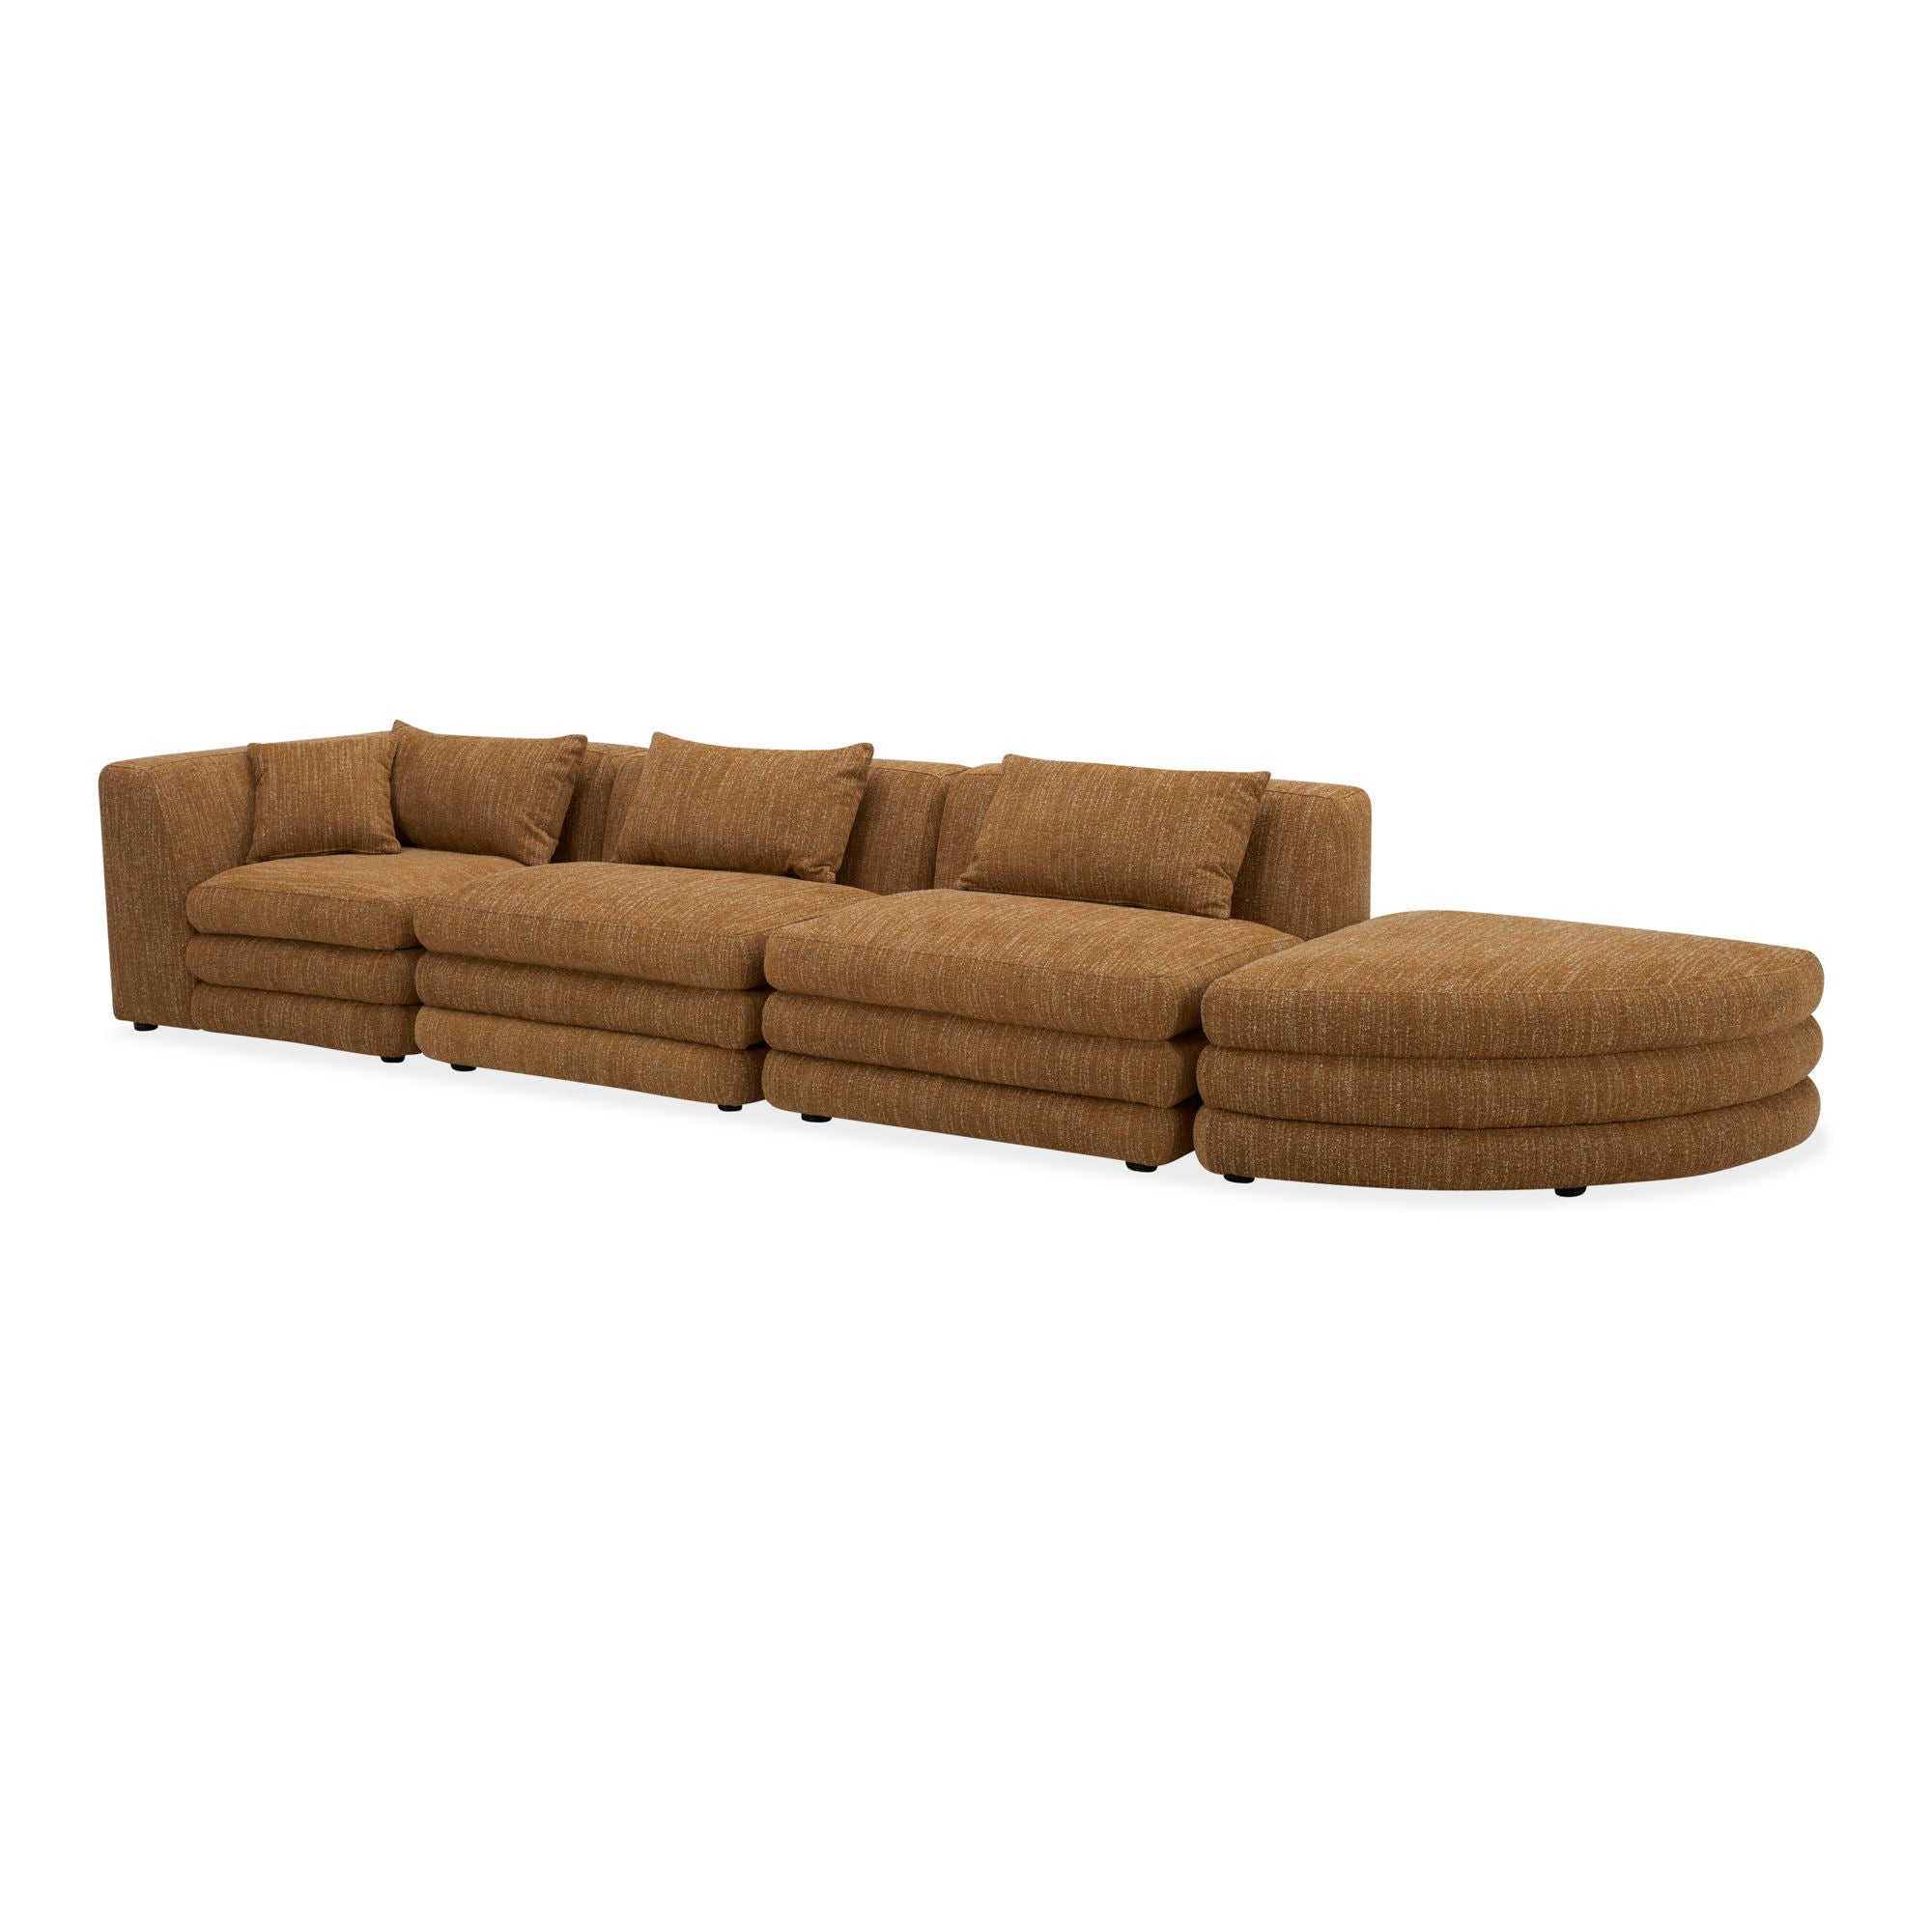 Lowtide - Linear Modular Sectional - Amber Glow-Stationary Sectionals-American Furniture Outlet